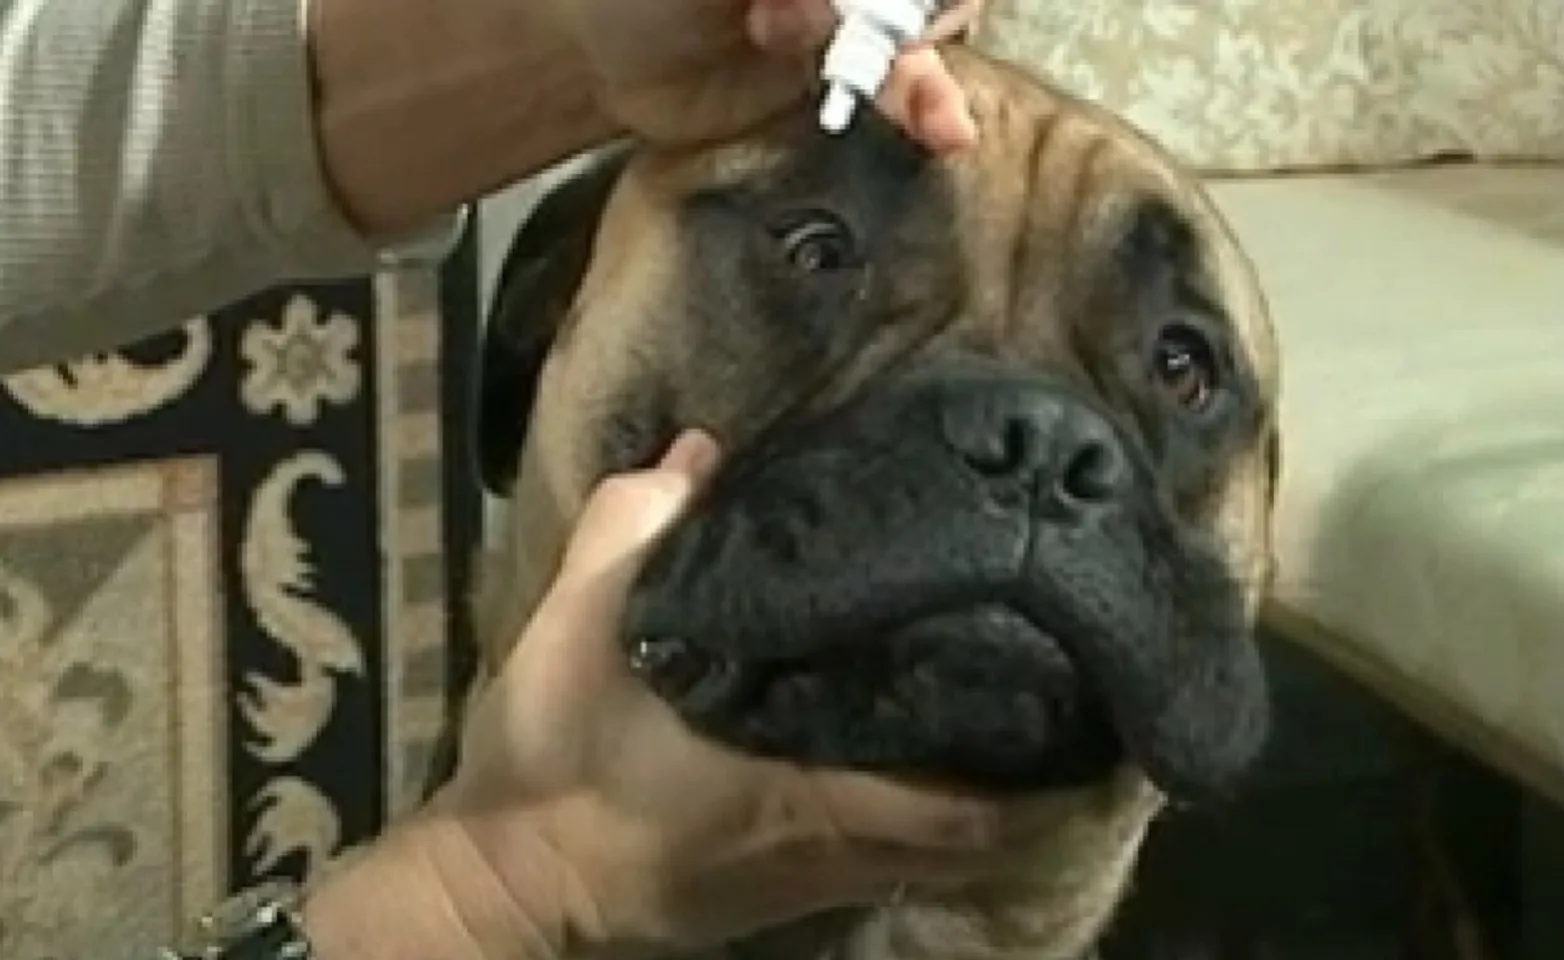 A person administering eye drops to a dog